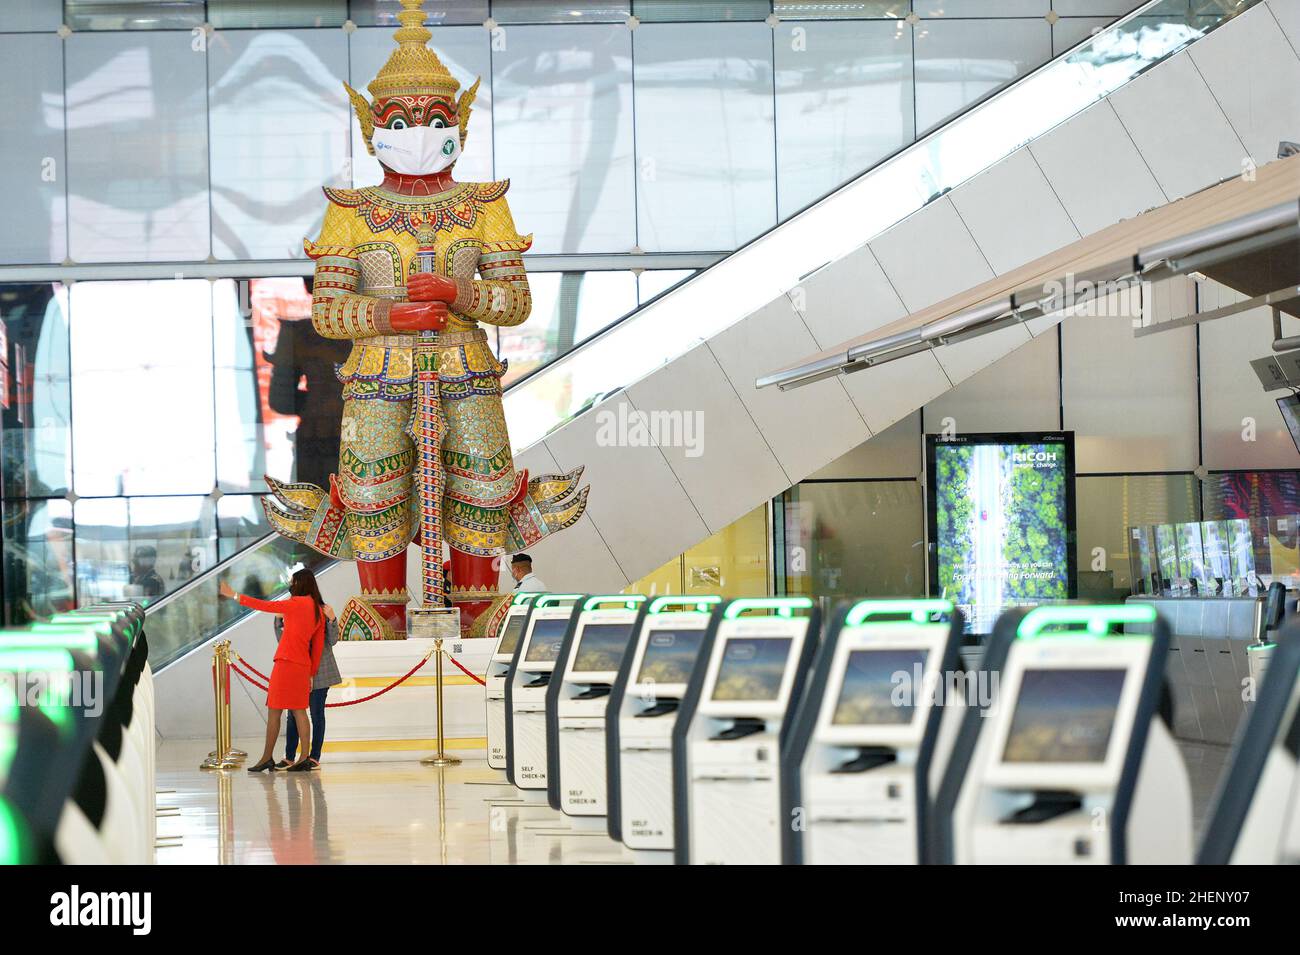 BANGKOK, Jan. 12, 2022 (Xinhua) -- People are seen at the Suvarnabhumi International Airport in Bangkok, Thailand, Jan. 11, 2022. Due to concerns about a new wave of COVID-19 outbreak, Thailand halted the quarantine-free travel scheme from Dec. 22, 2021 and most of its Sandbox Program, which enables quarantine-free entry while requiring visitors to stay in a specific destination for seven days with free movement during their stay, except for the resort island of Phuket. According to the Center for COVID-19 Situation Administration, from Jan. 11 onwards, Thailand will allow quaran Stock Photo